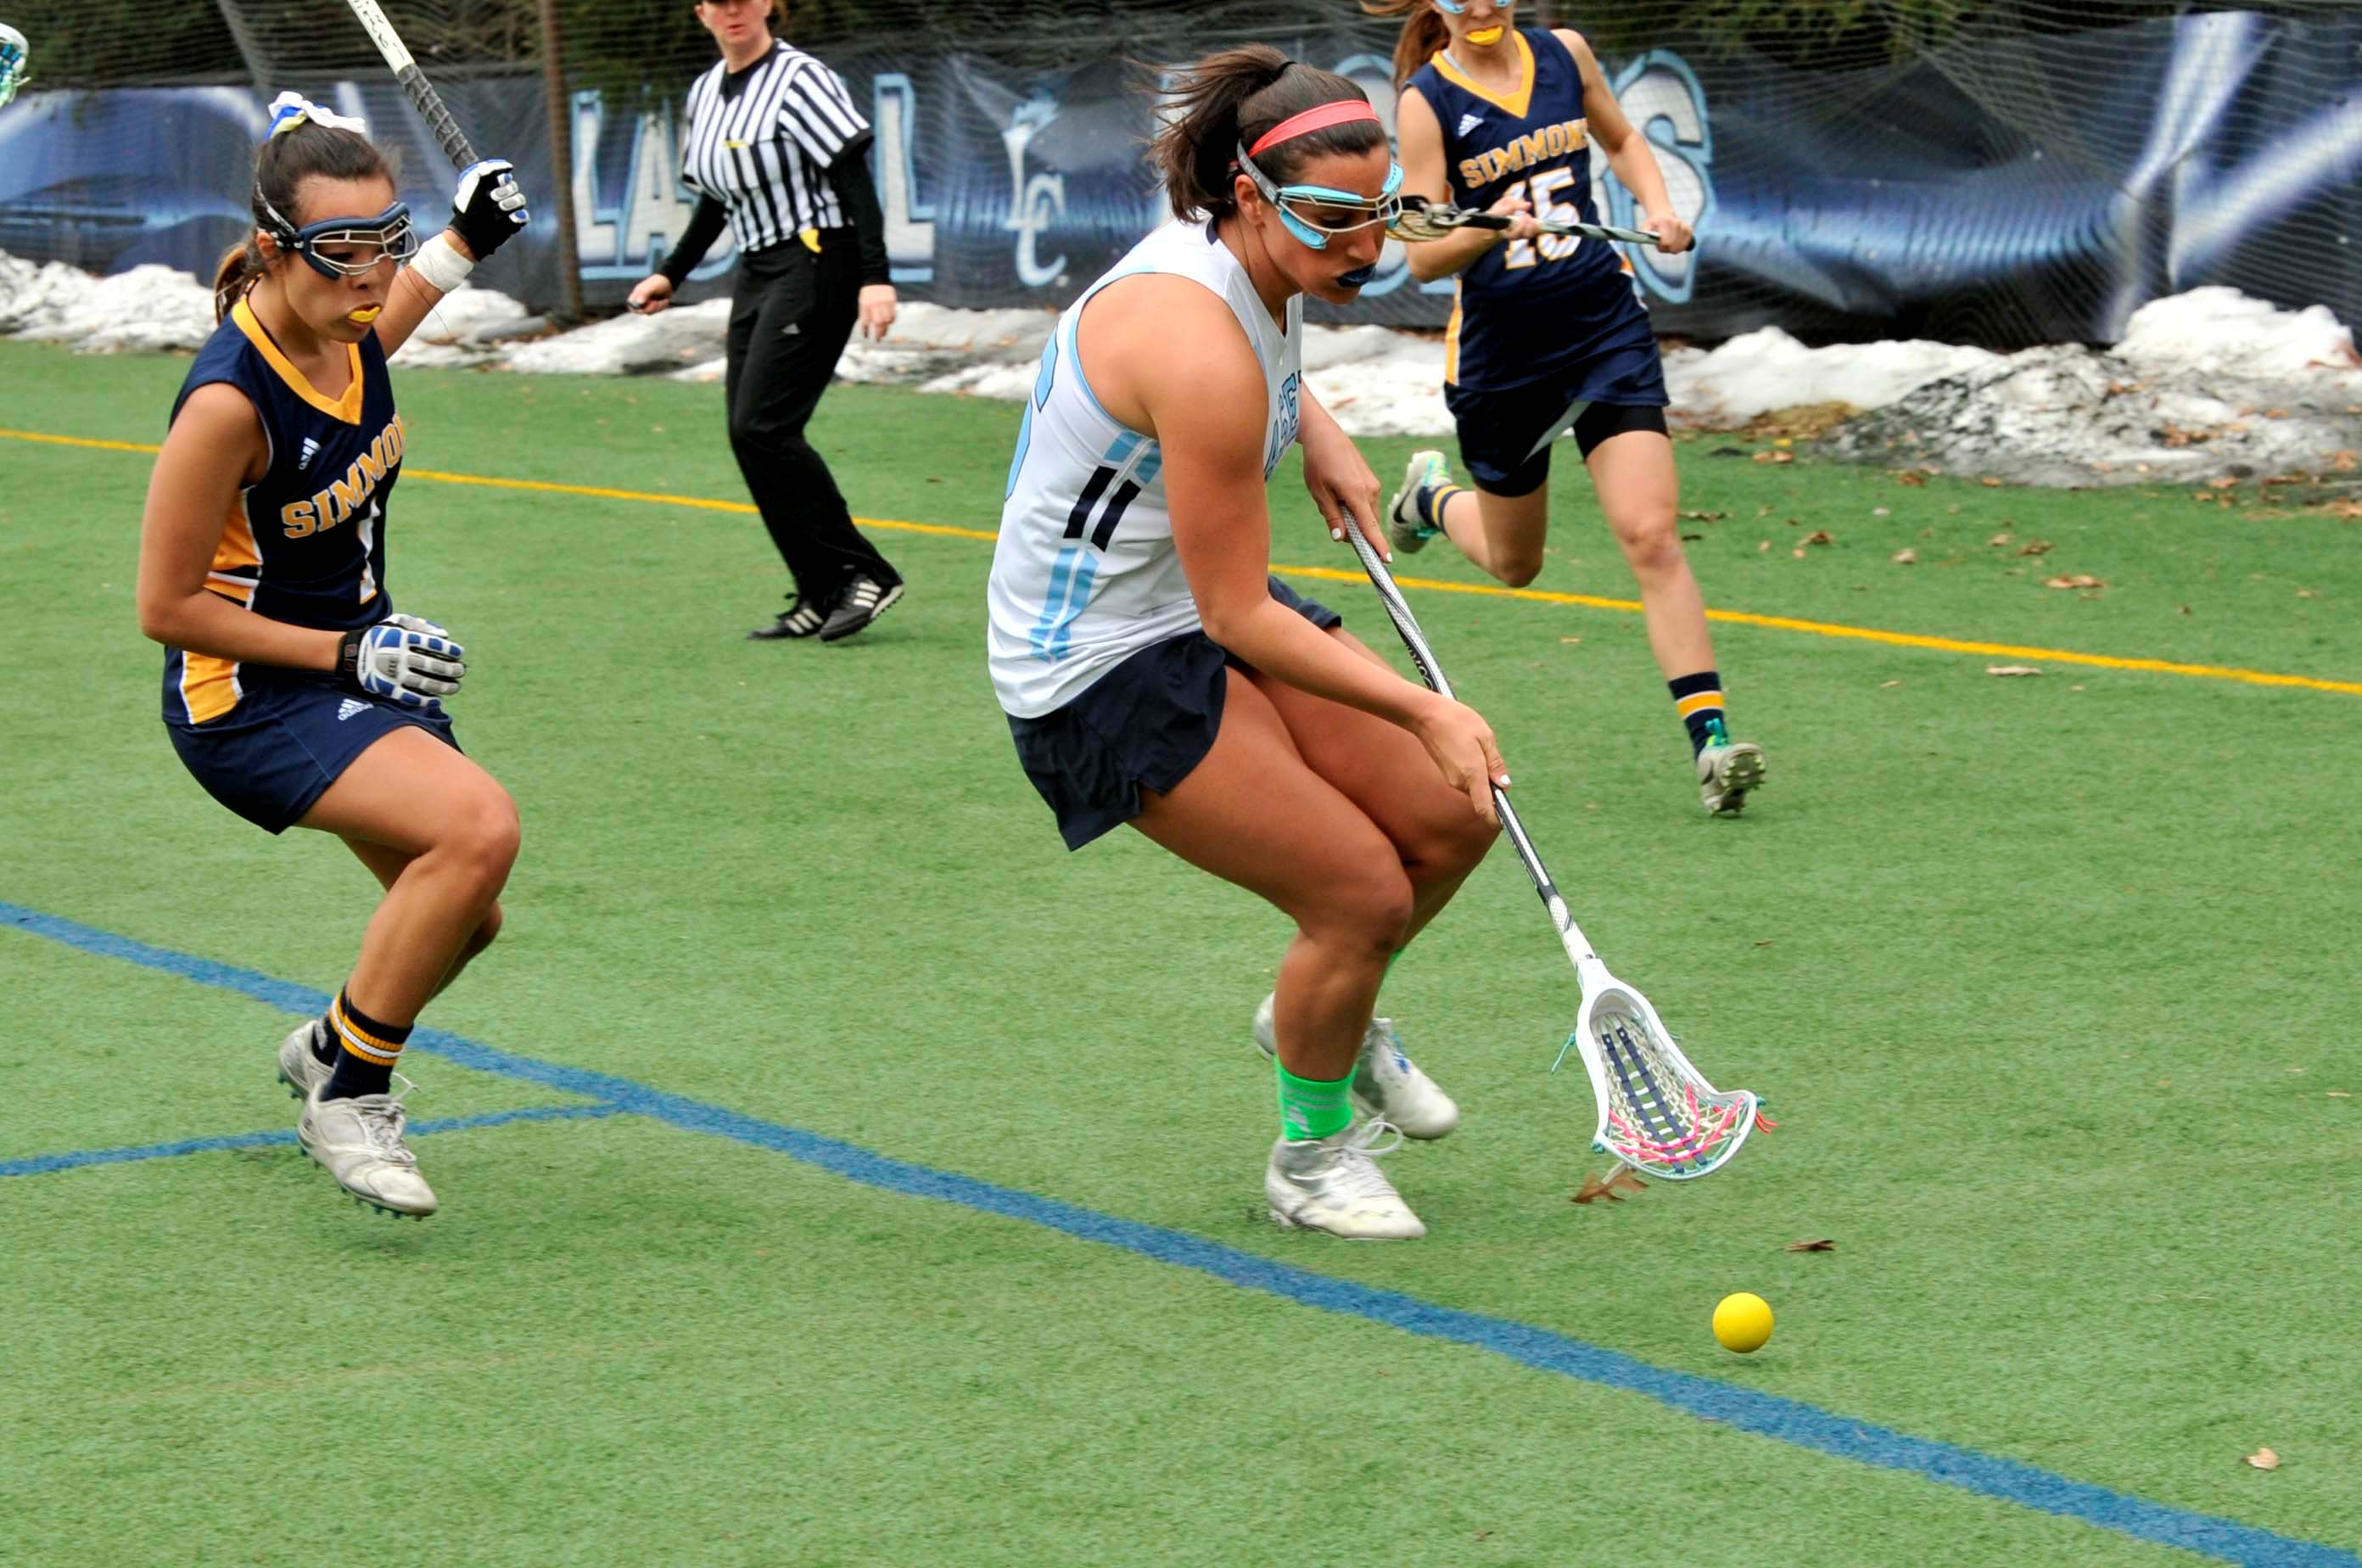 Women's Lacrosse Bounces Back with 24-12 Win at Mount Ida